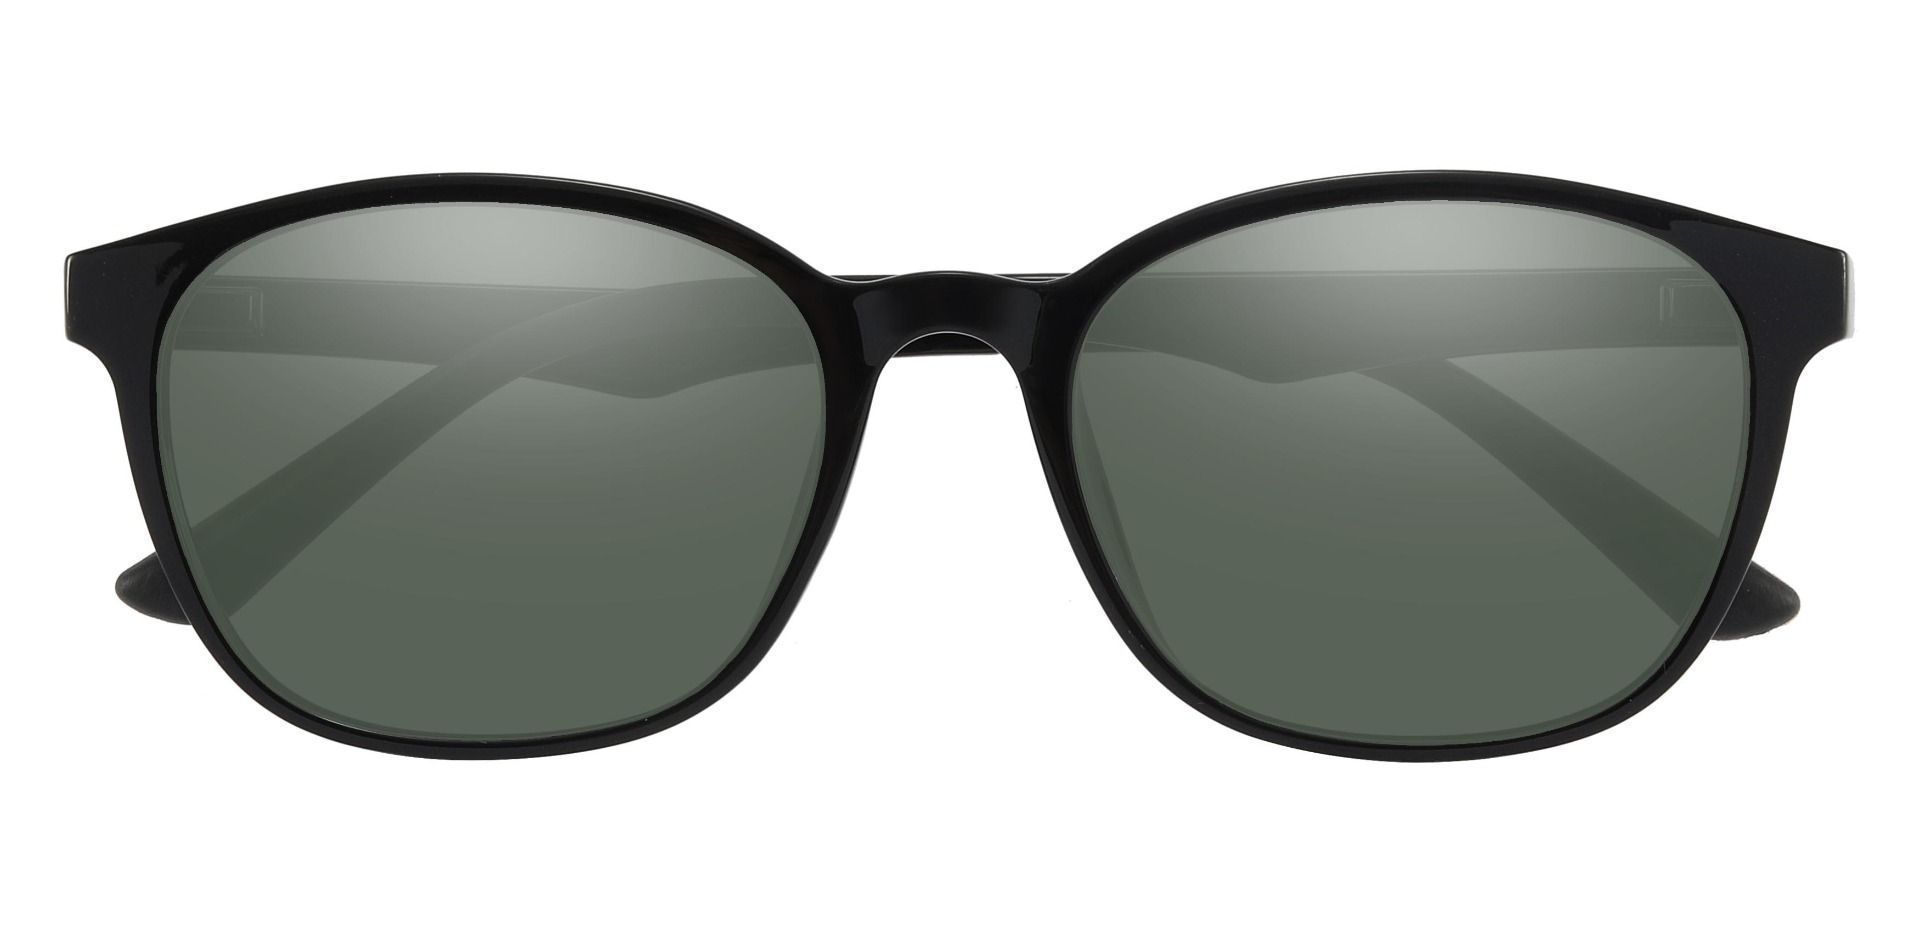 Ursula Oval Reading Sunglasses - Black Frame With Green Lenses